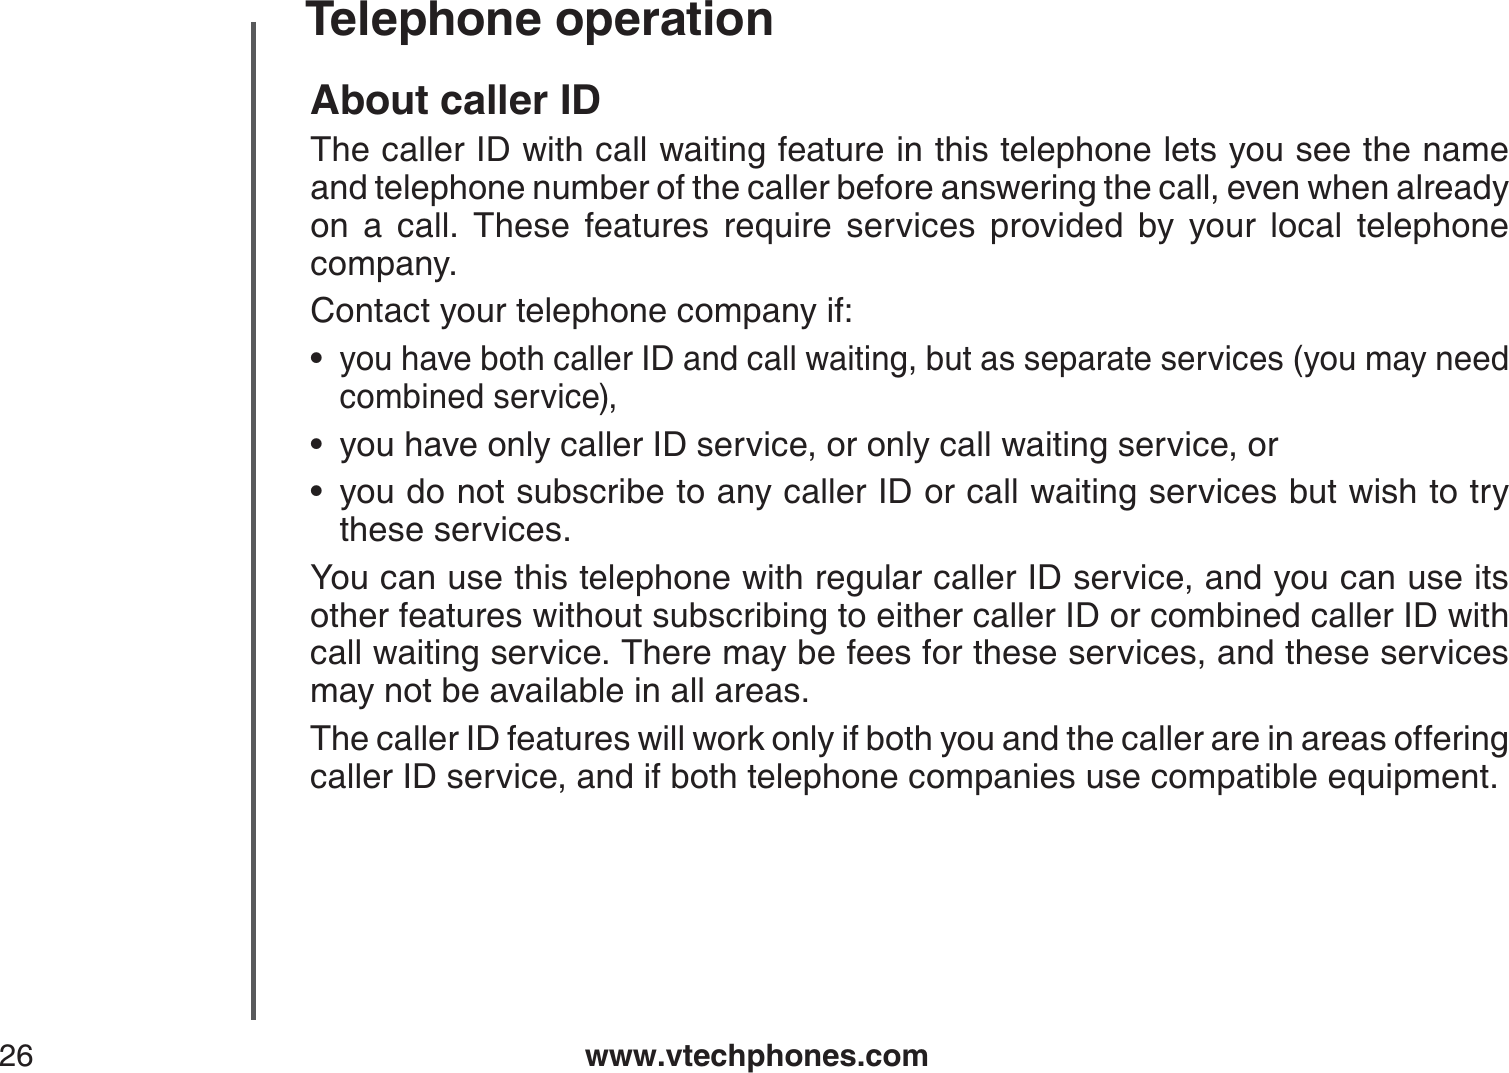 www.vtechphones.com26Telephone operationAbout caller IDThe caller ID with call waiting feature in this telephone lets you see the name and telephone number of the caller before answering the call, even when already on a call. These features require services provided by your local telephone company. Contact your telephone company if:you have both caller ID and call waiting, but as separate services (you may need combined service),you have only caller ID service, or only call waiting service, oryou do not subscribe to any caller ID or call waiting services but wish to try these services.You can use this telephone with regular caller ID service, and you can use its other features without subscribing to either caller ID or combined caller ID with call waiting service. There may be fees for these services, and these services may not be available in all areas.The caller ID features will work only if both you and the caller are in areas offeringcaller ID service, and if both telephone companies use compatible equipment.•••